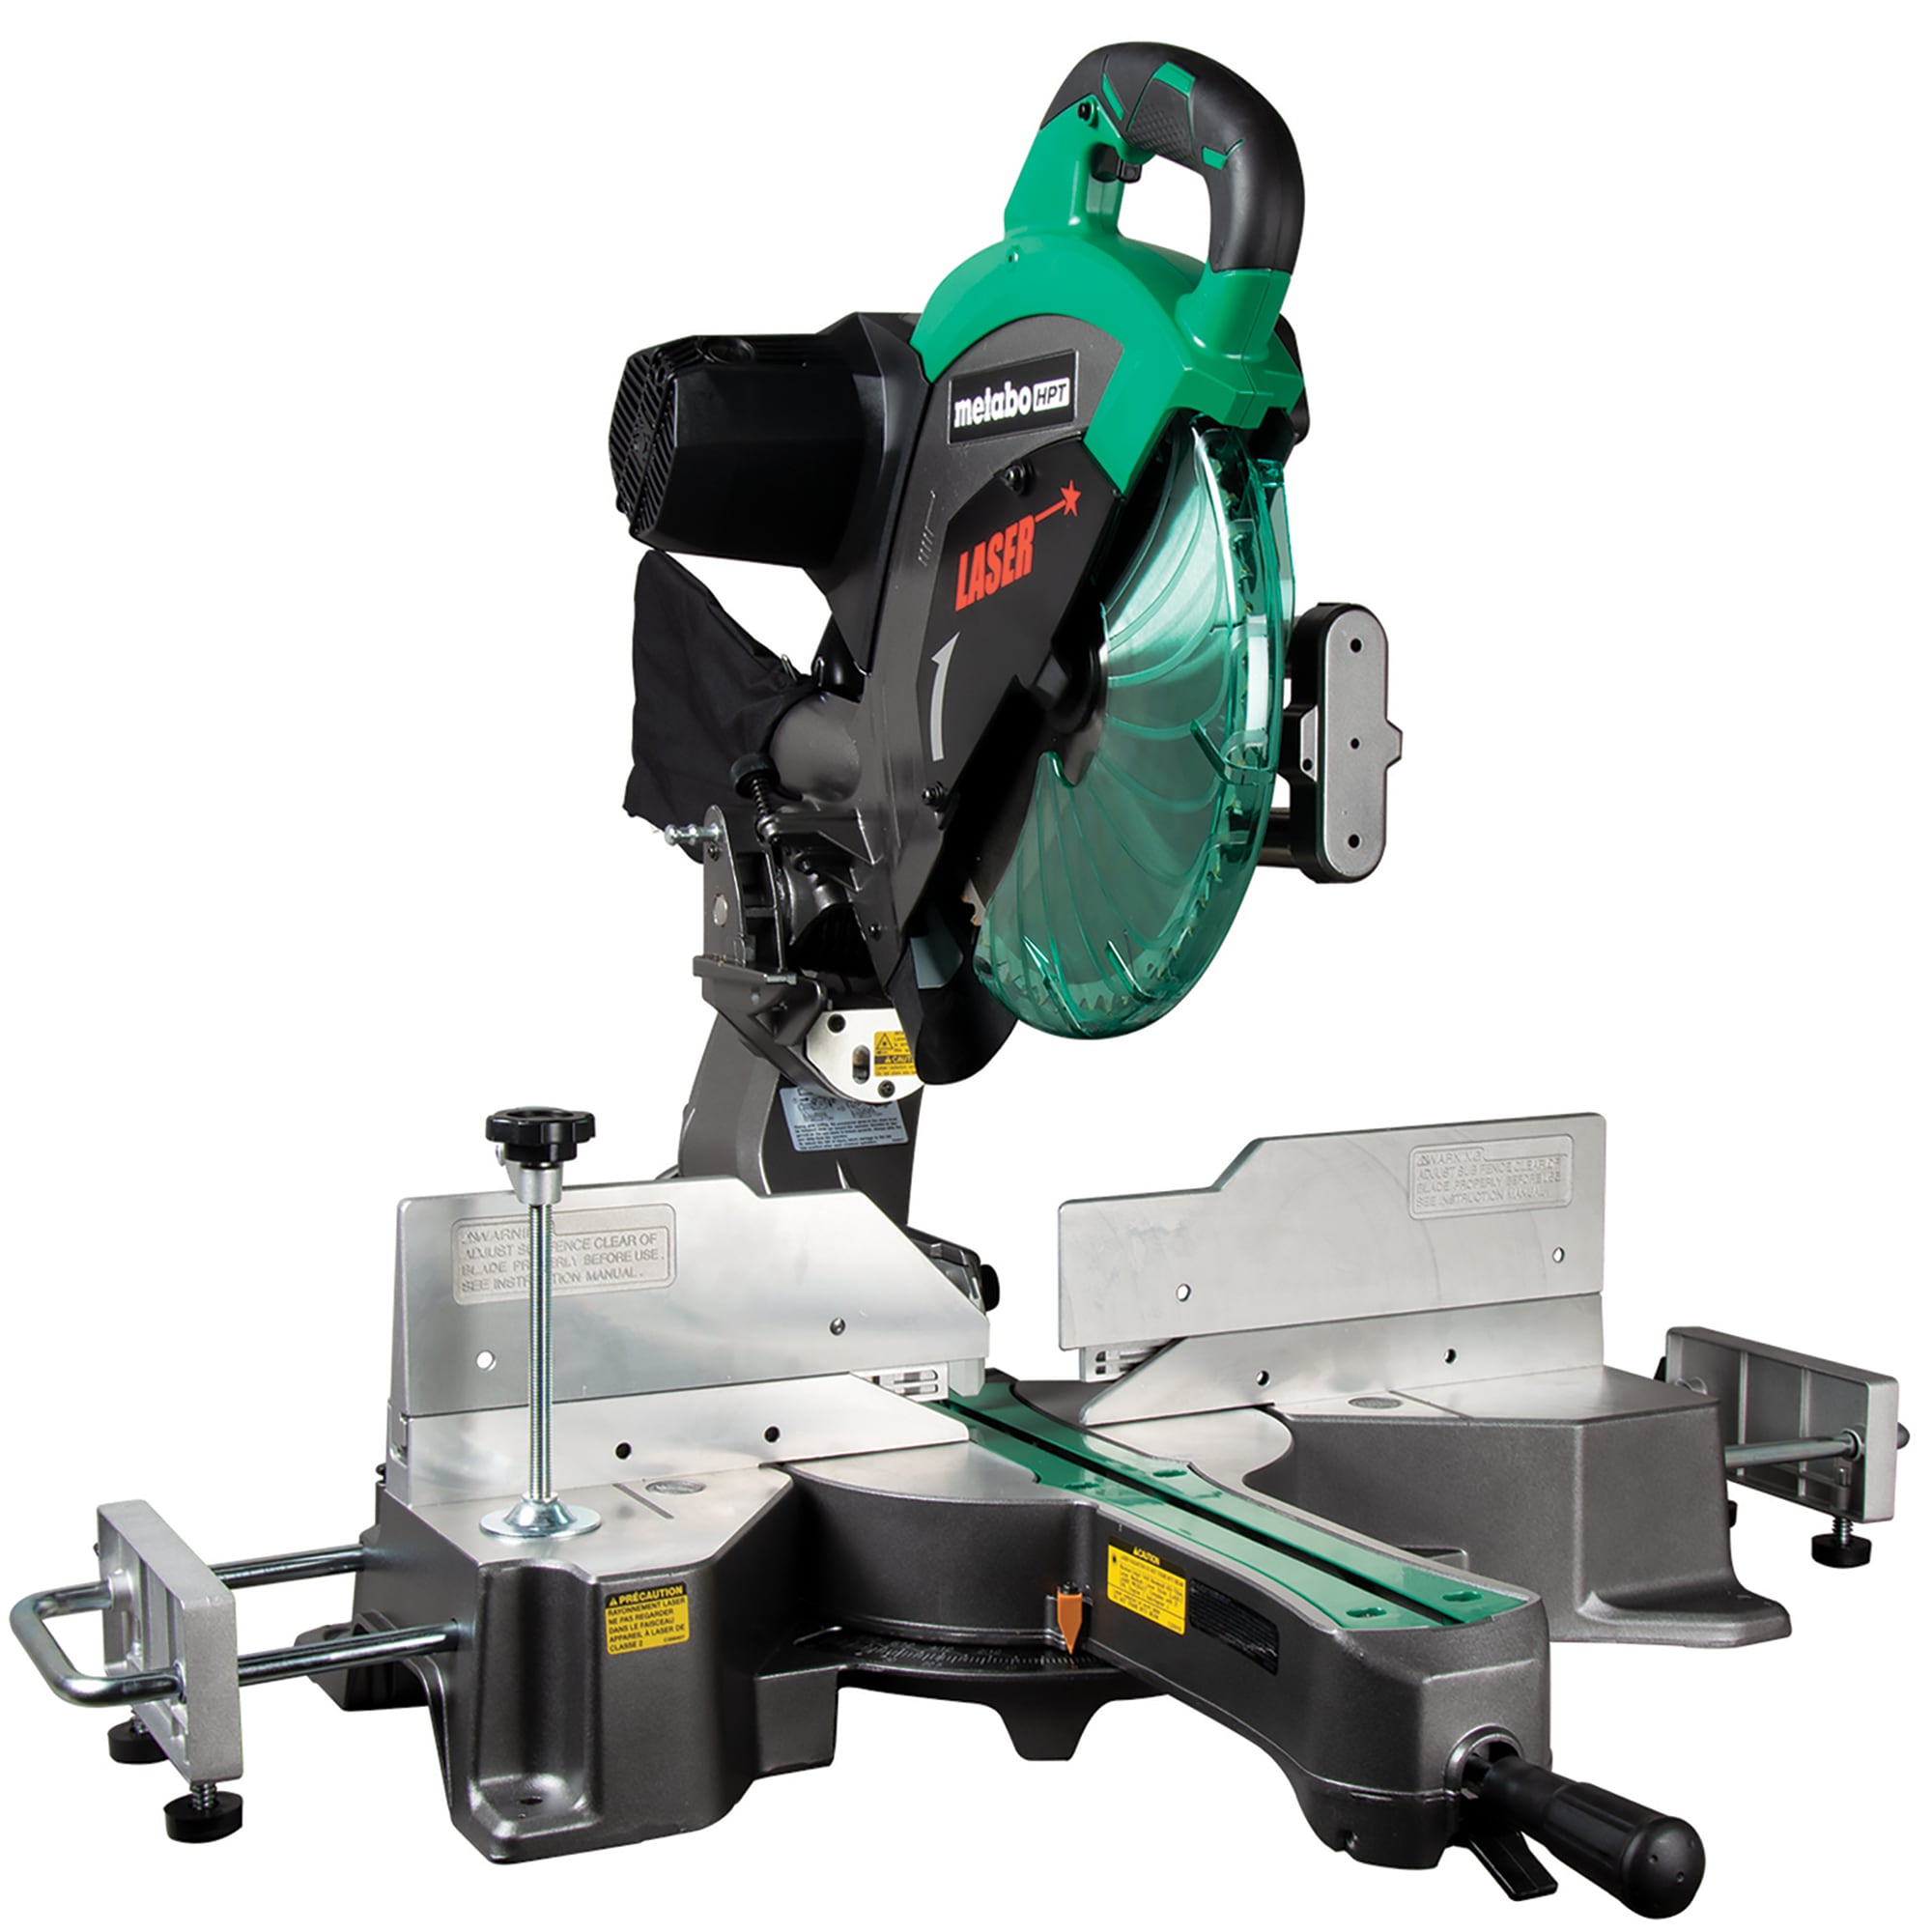 12-in 15-Amp Dual Bevel Sliding Compound Corded Miter Saw with Laser Guide | - Metabo HPT C12RSH2M